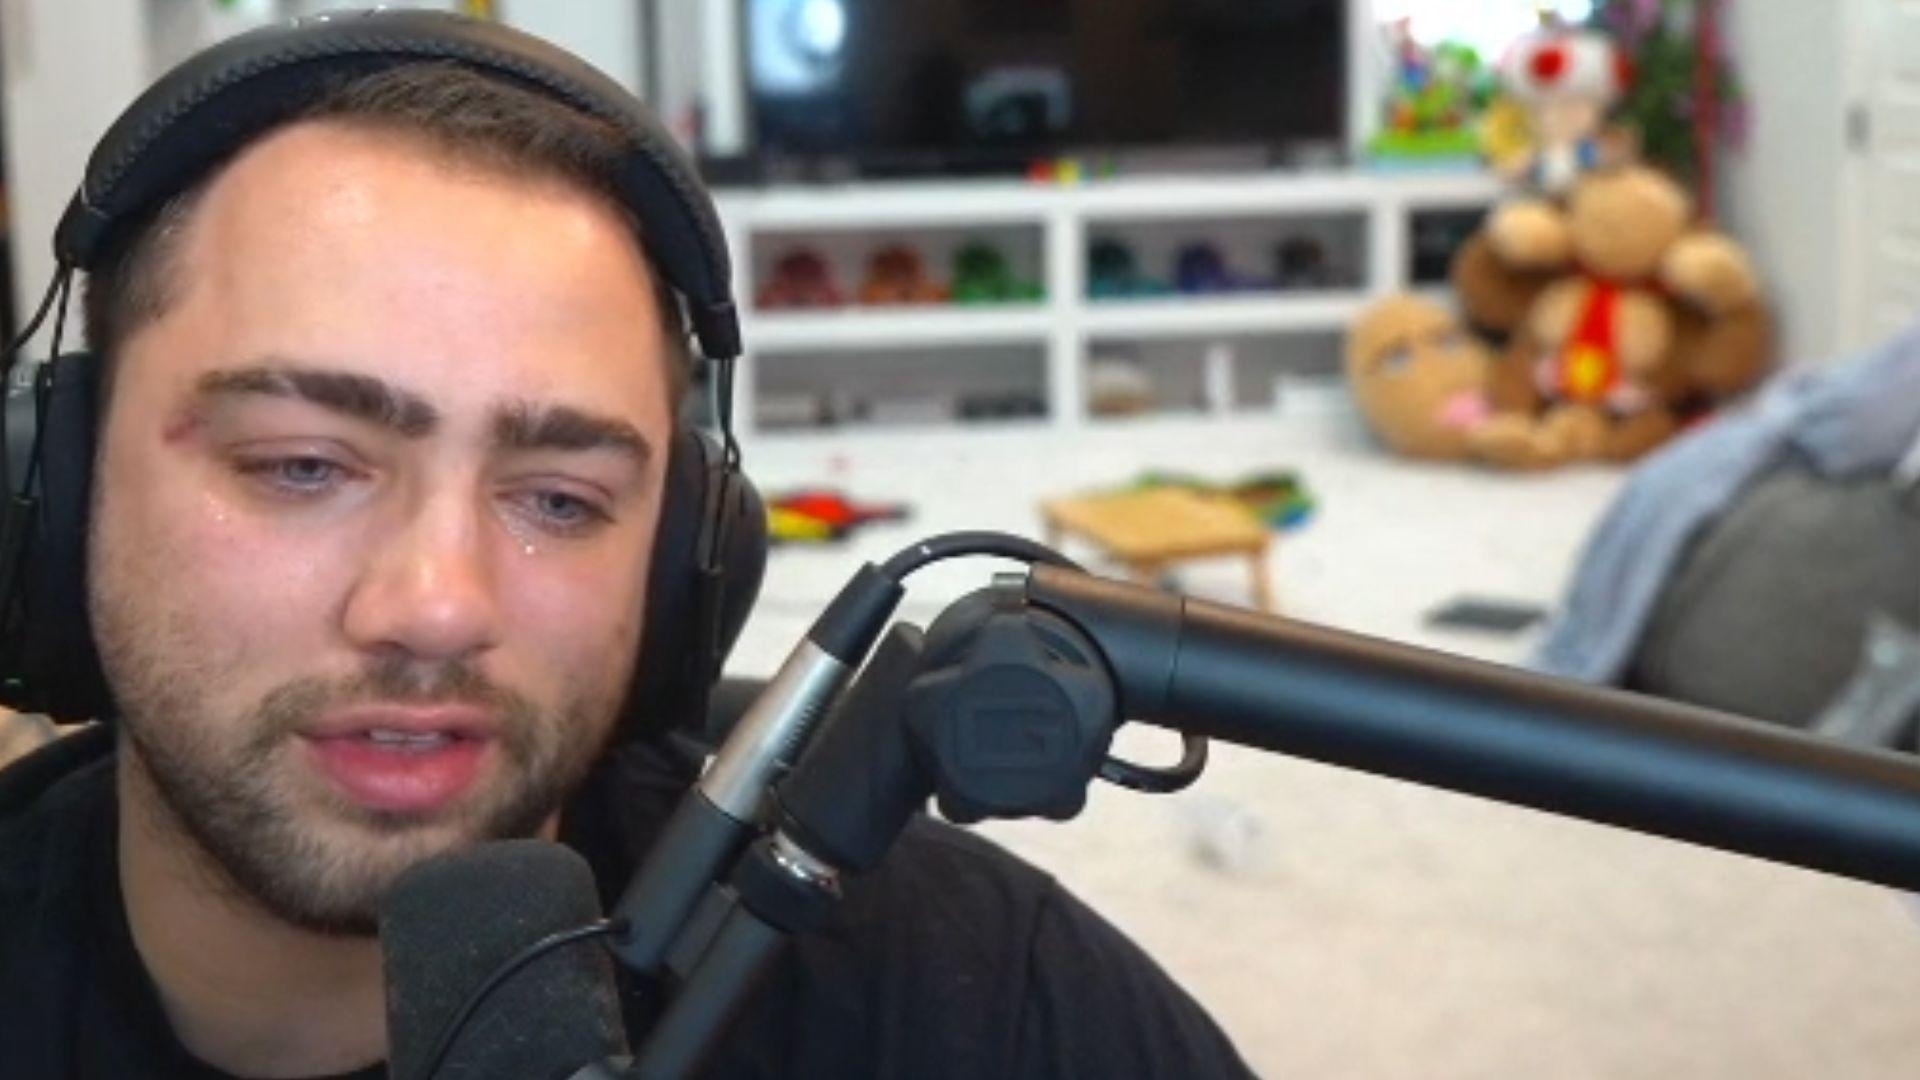 Mizkif at his streaming with tears rolling down his face